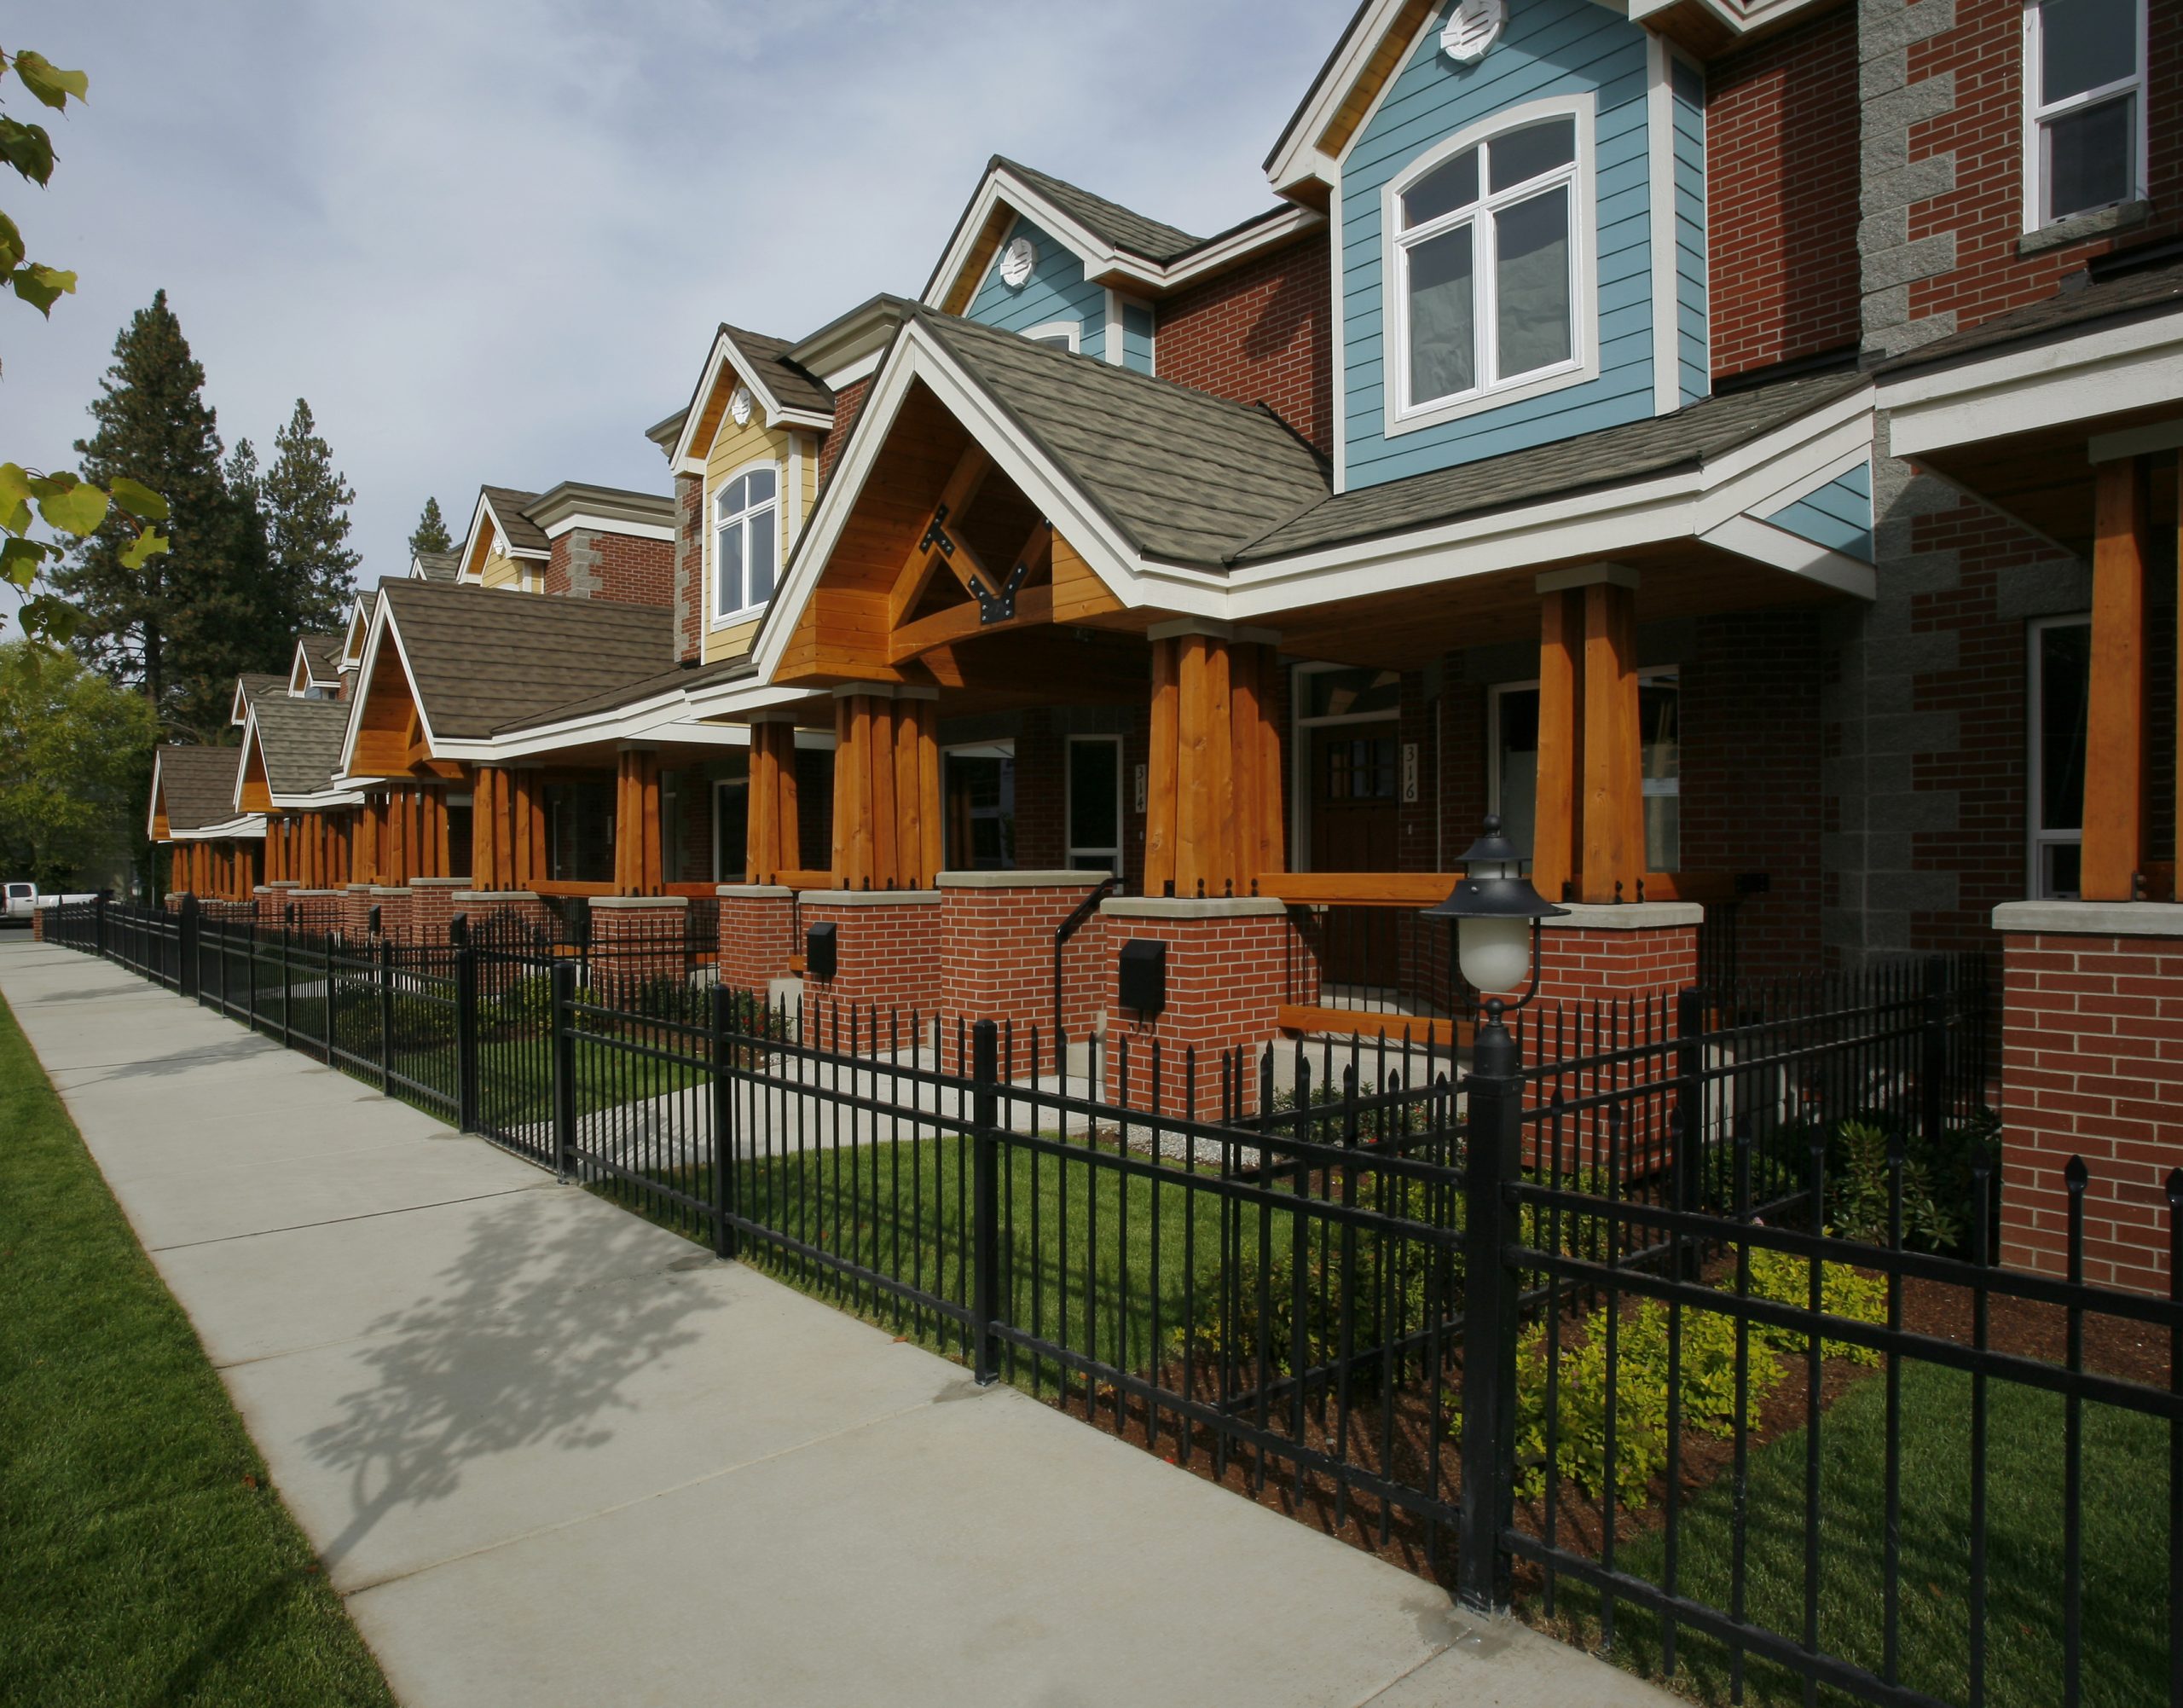 Ice Plant, located in downtown Coeur d'Alene, Idaho includes street front porches and tree lined streets to provide a sense of community and enhance the existing urban neighborhood fabric of the surrounding area.